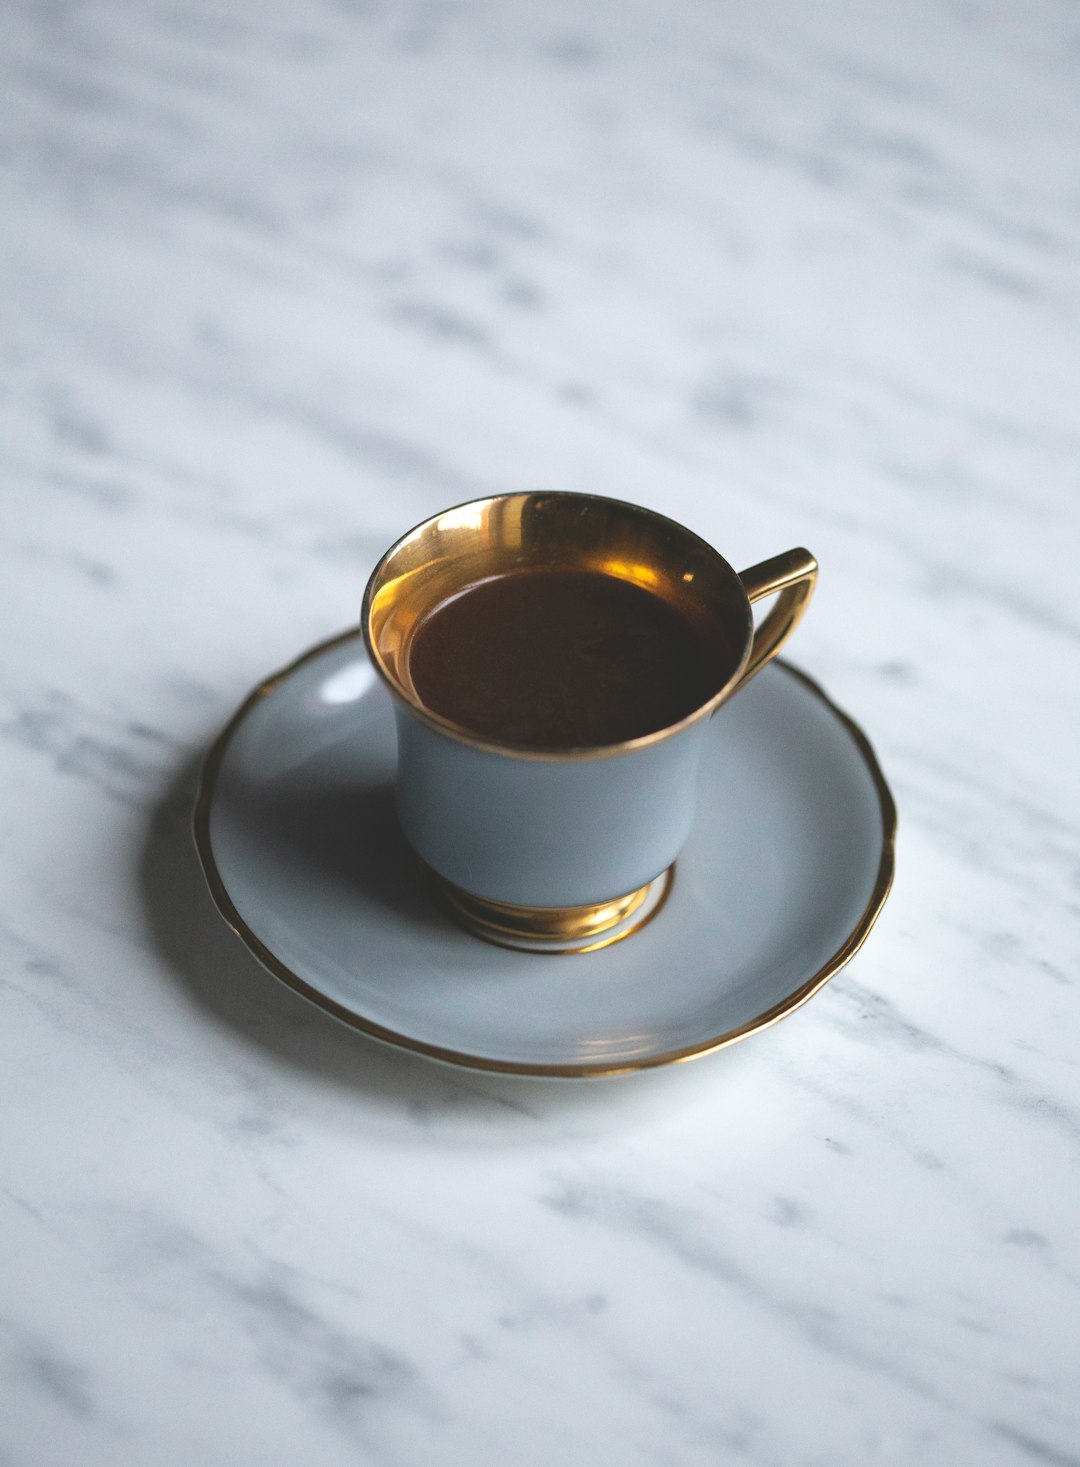 white and gold-colored teacup with saucer